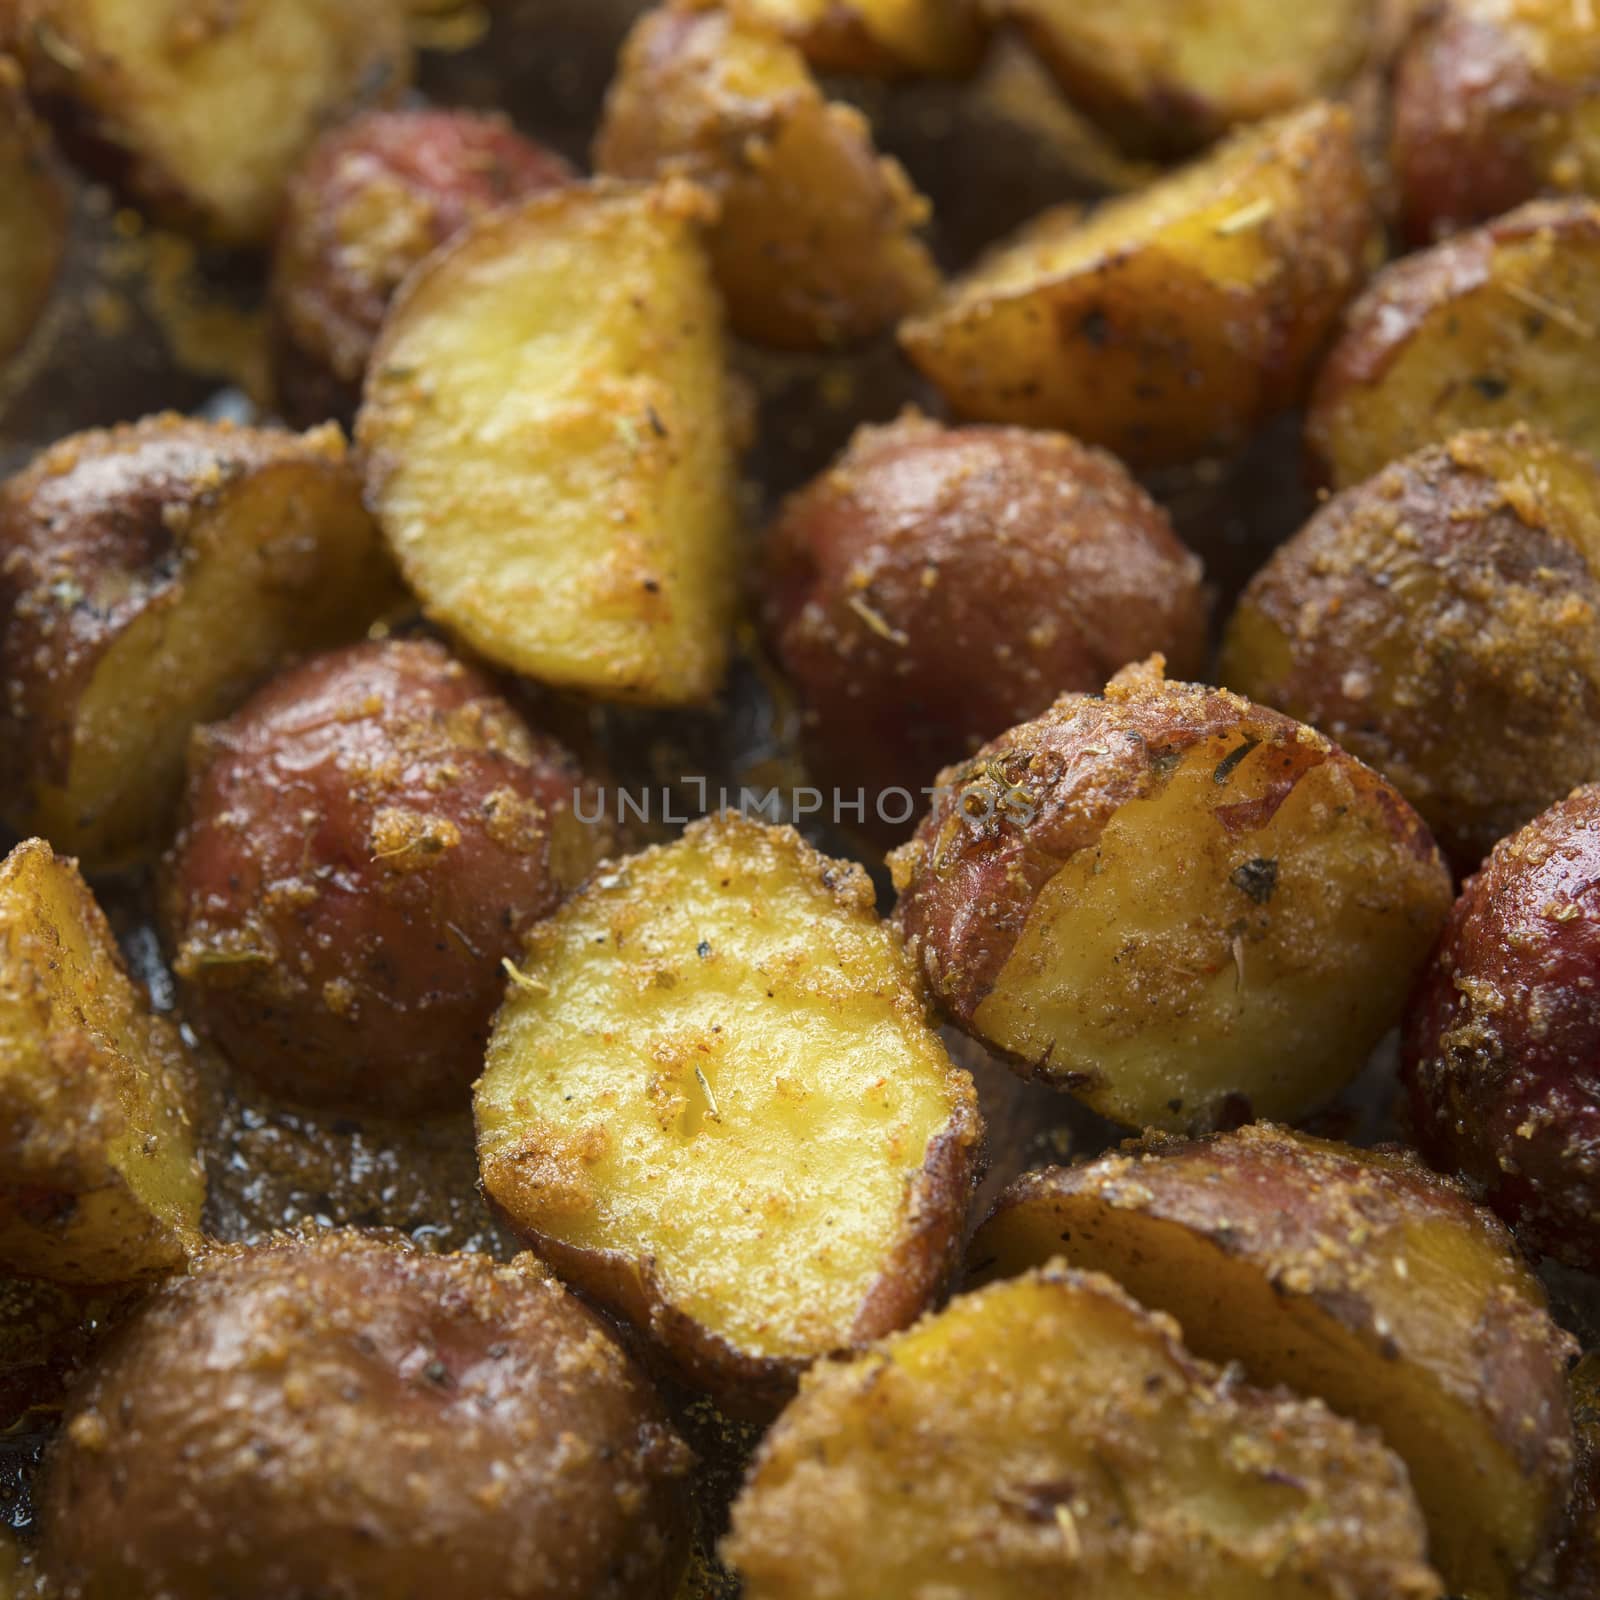 Top view close up freshly oven baked baby potatoes on wooden table, low light setting.